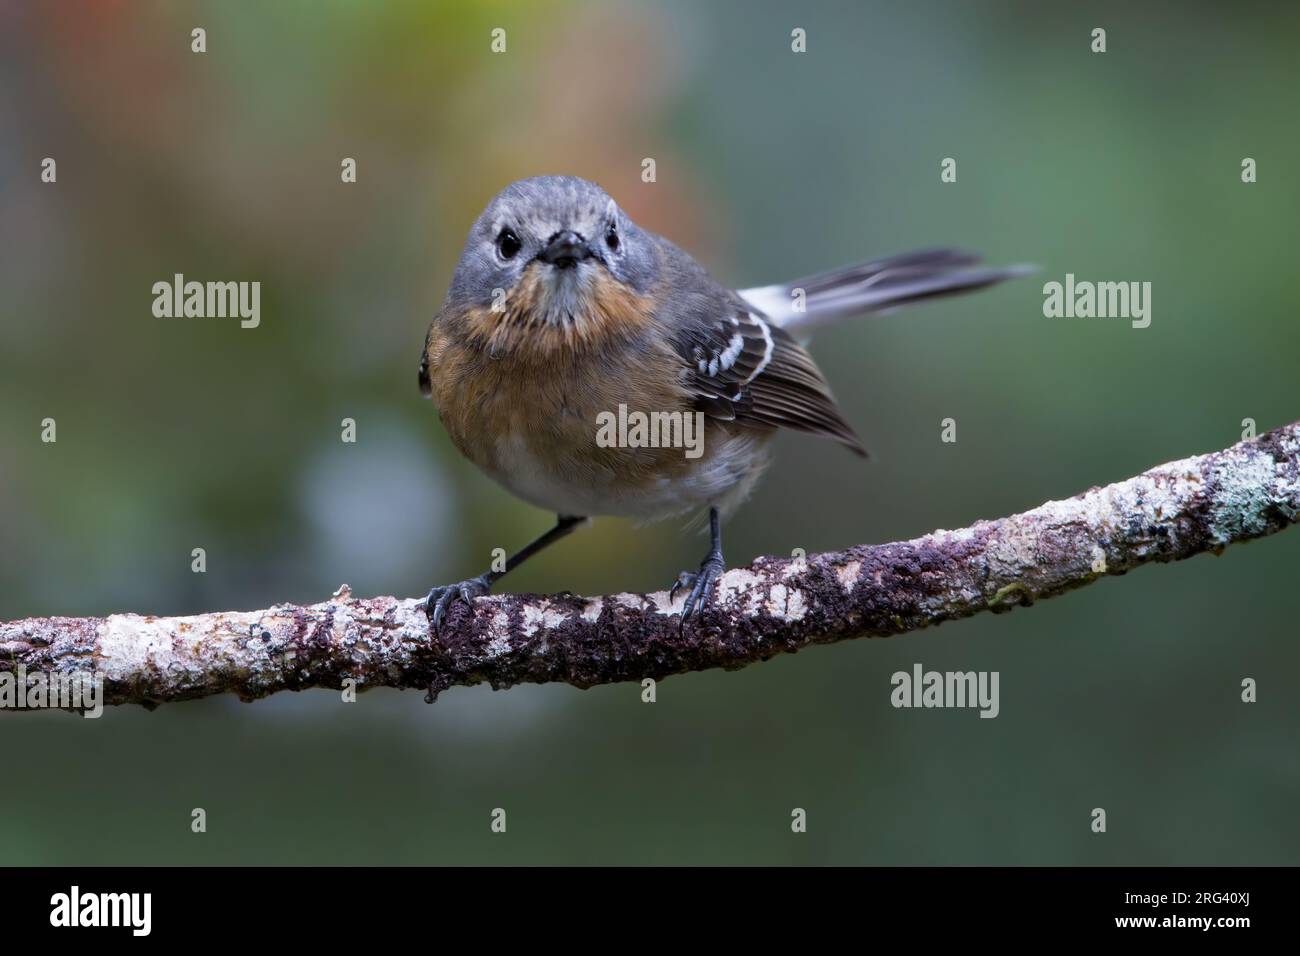 Kauaʻi ʻelepaio (Chasiempis sclateri) perched on a branch Stock Photo